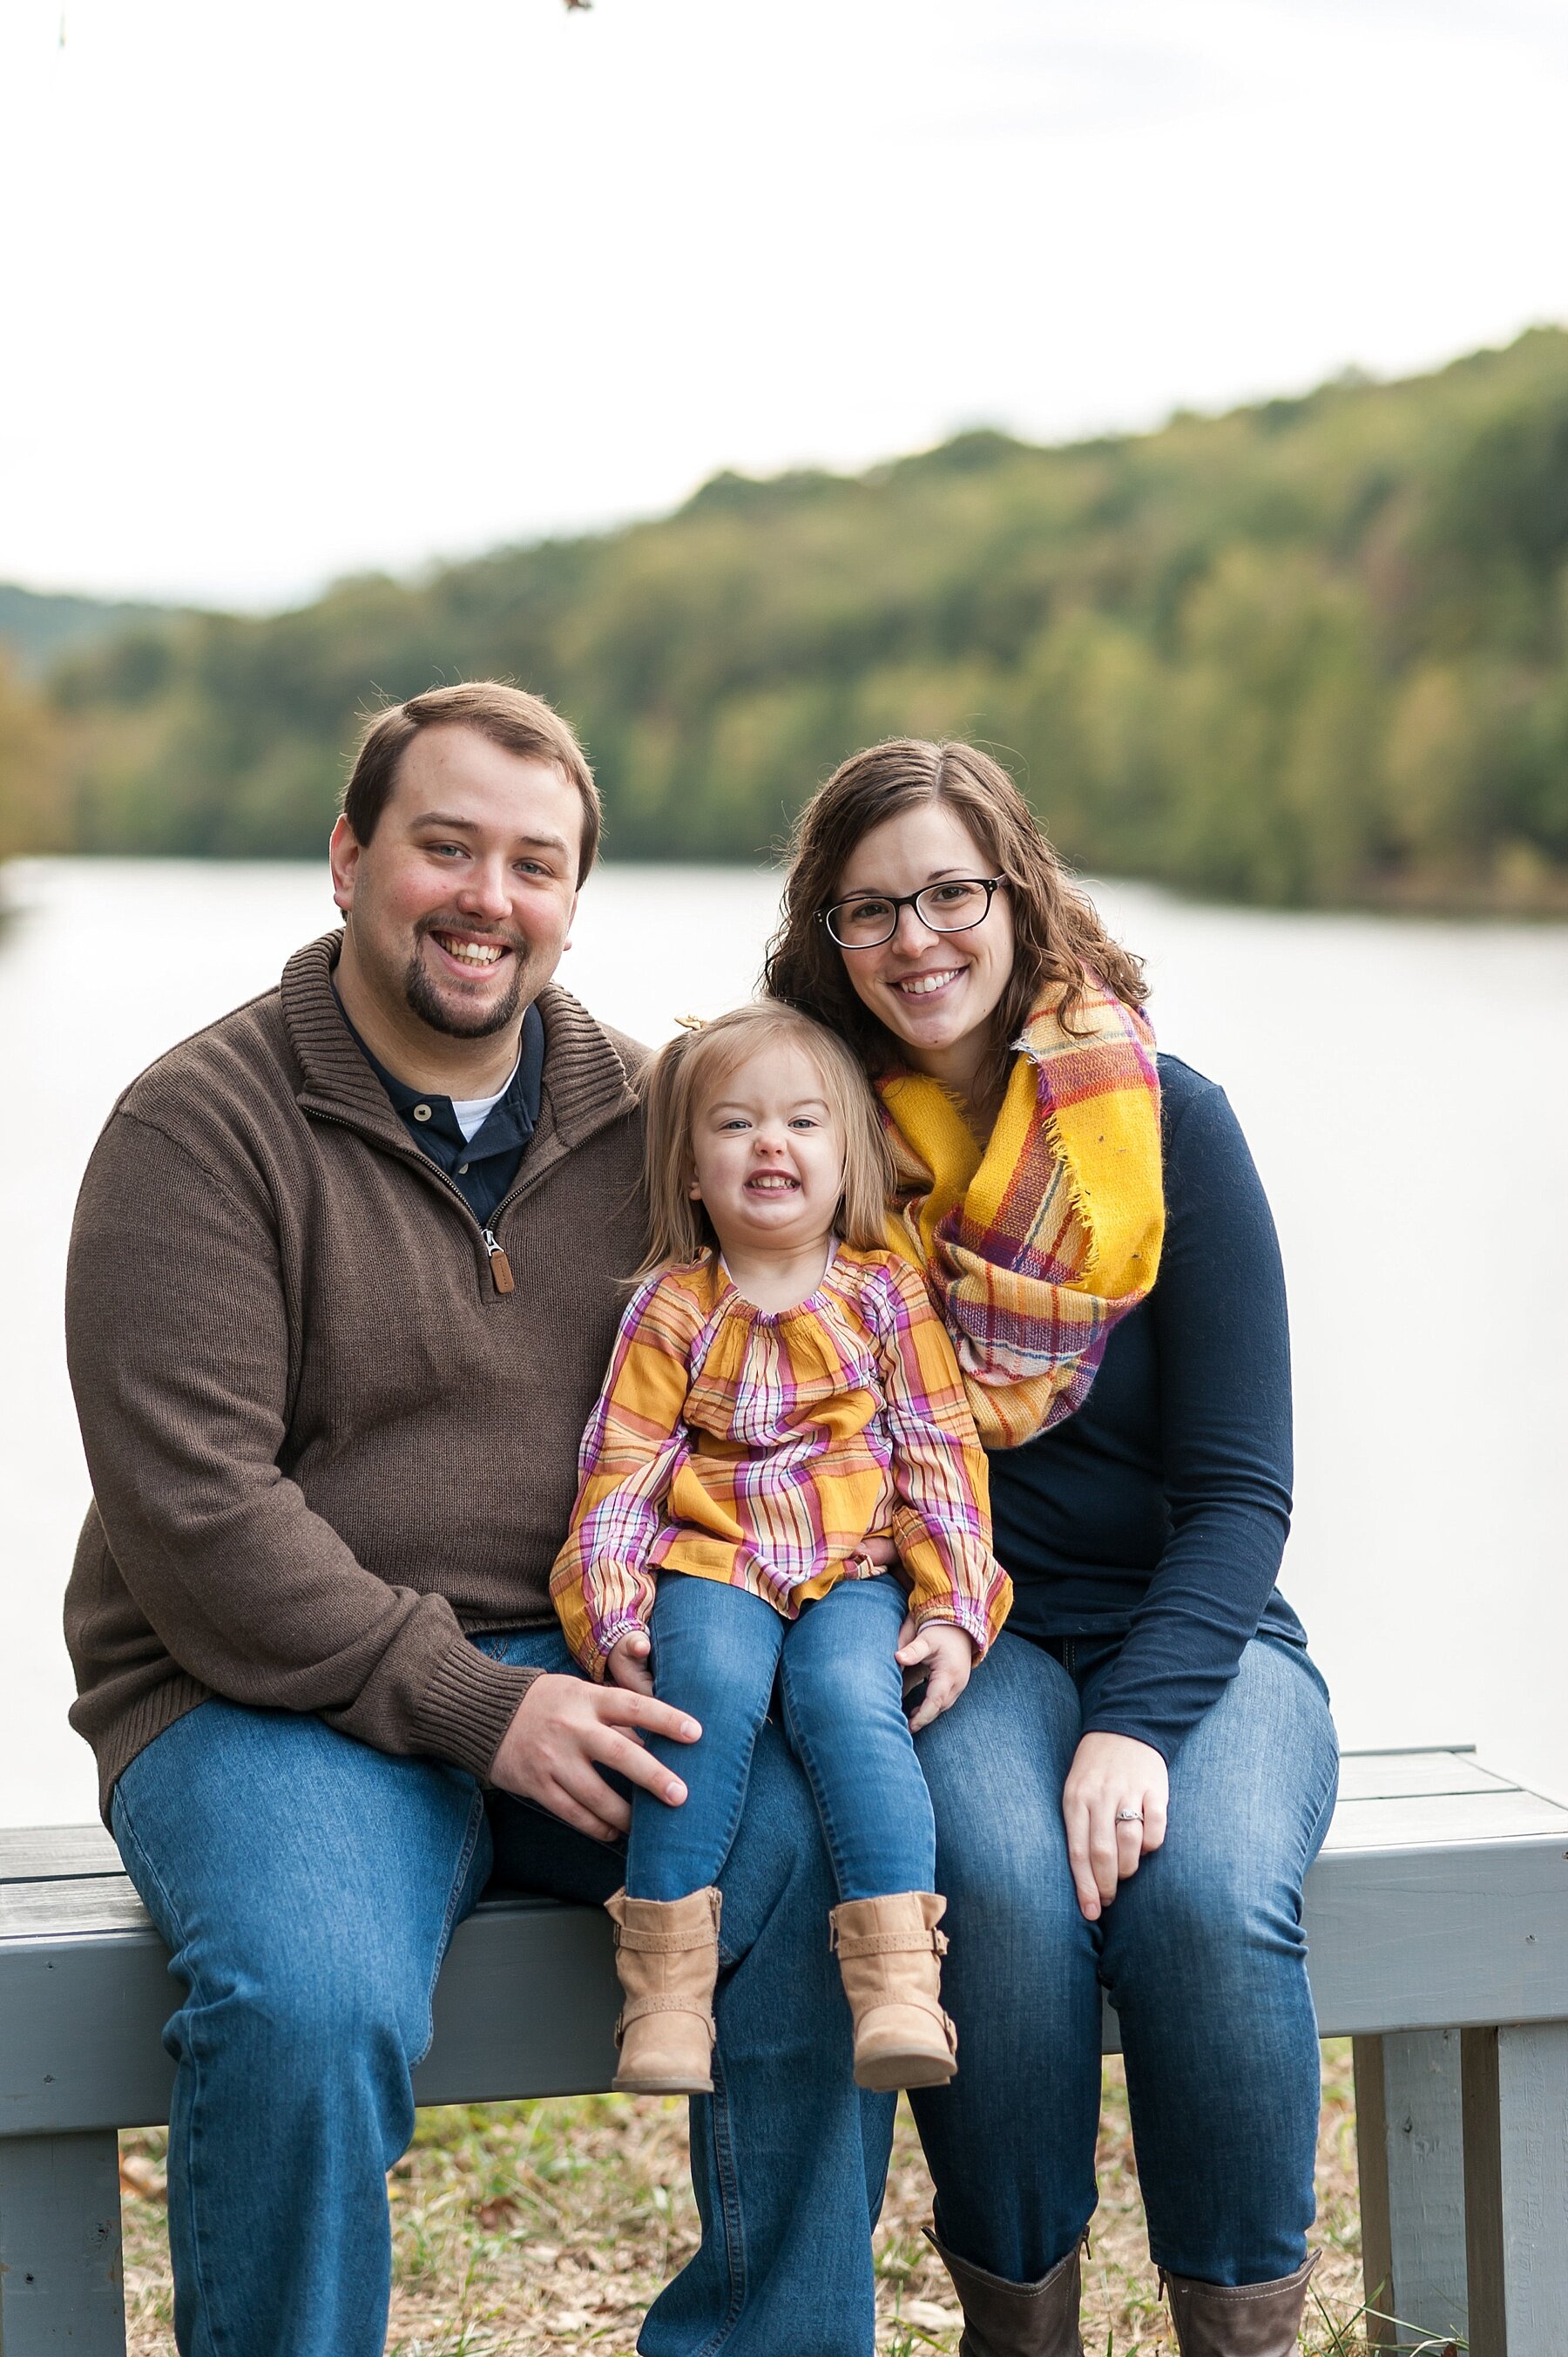 Wendy Zook Photography | Frederick MD family photographer, family photographer in Maryland, Maryland family photos, MD family photos, Lake Lingnore family photos, MD family photographer, Frederick family photographer, fall family photos, lakeside family photos